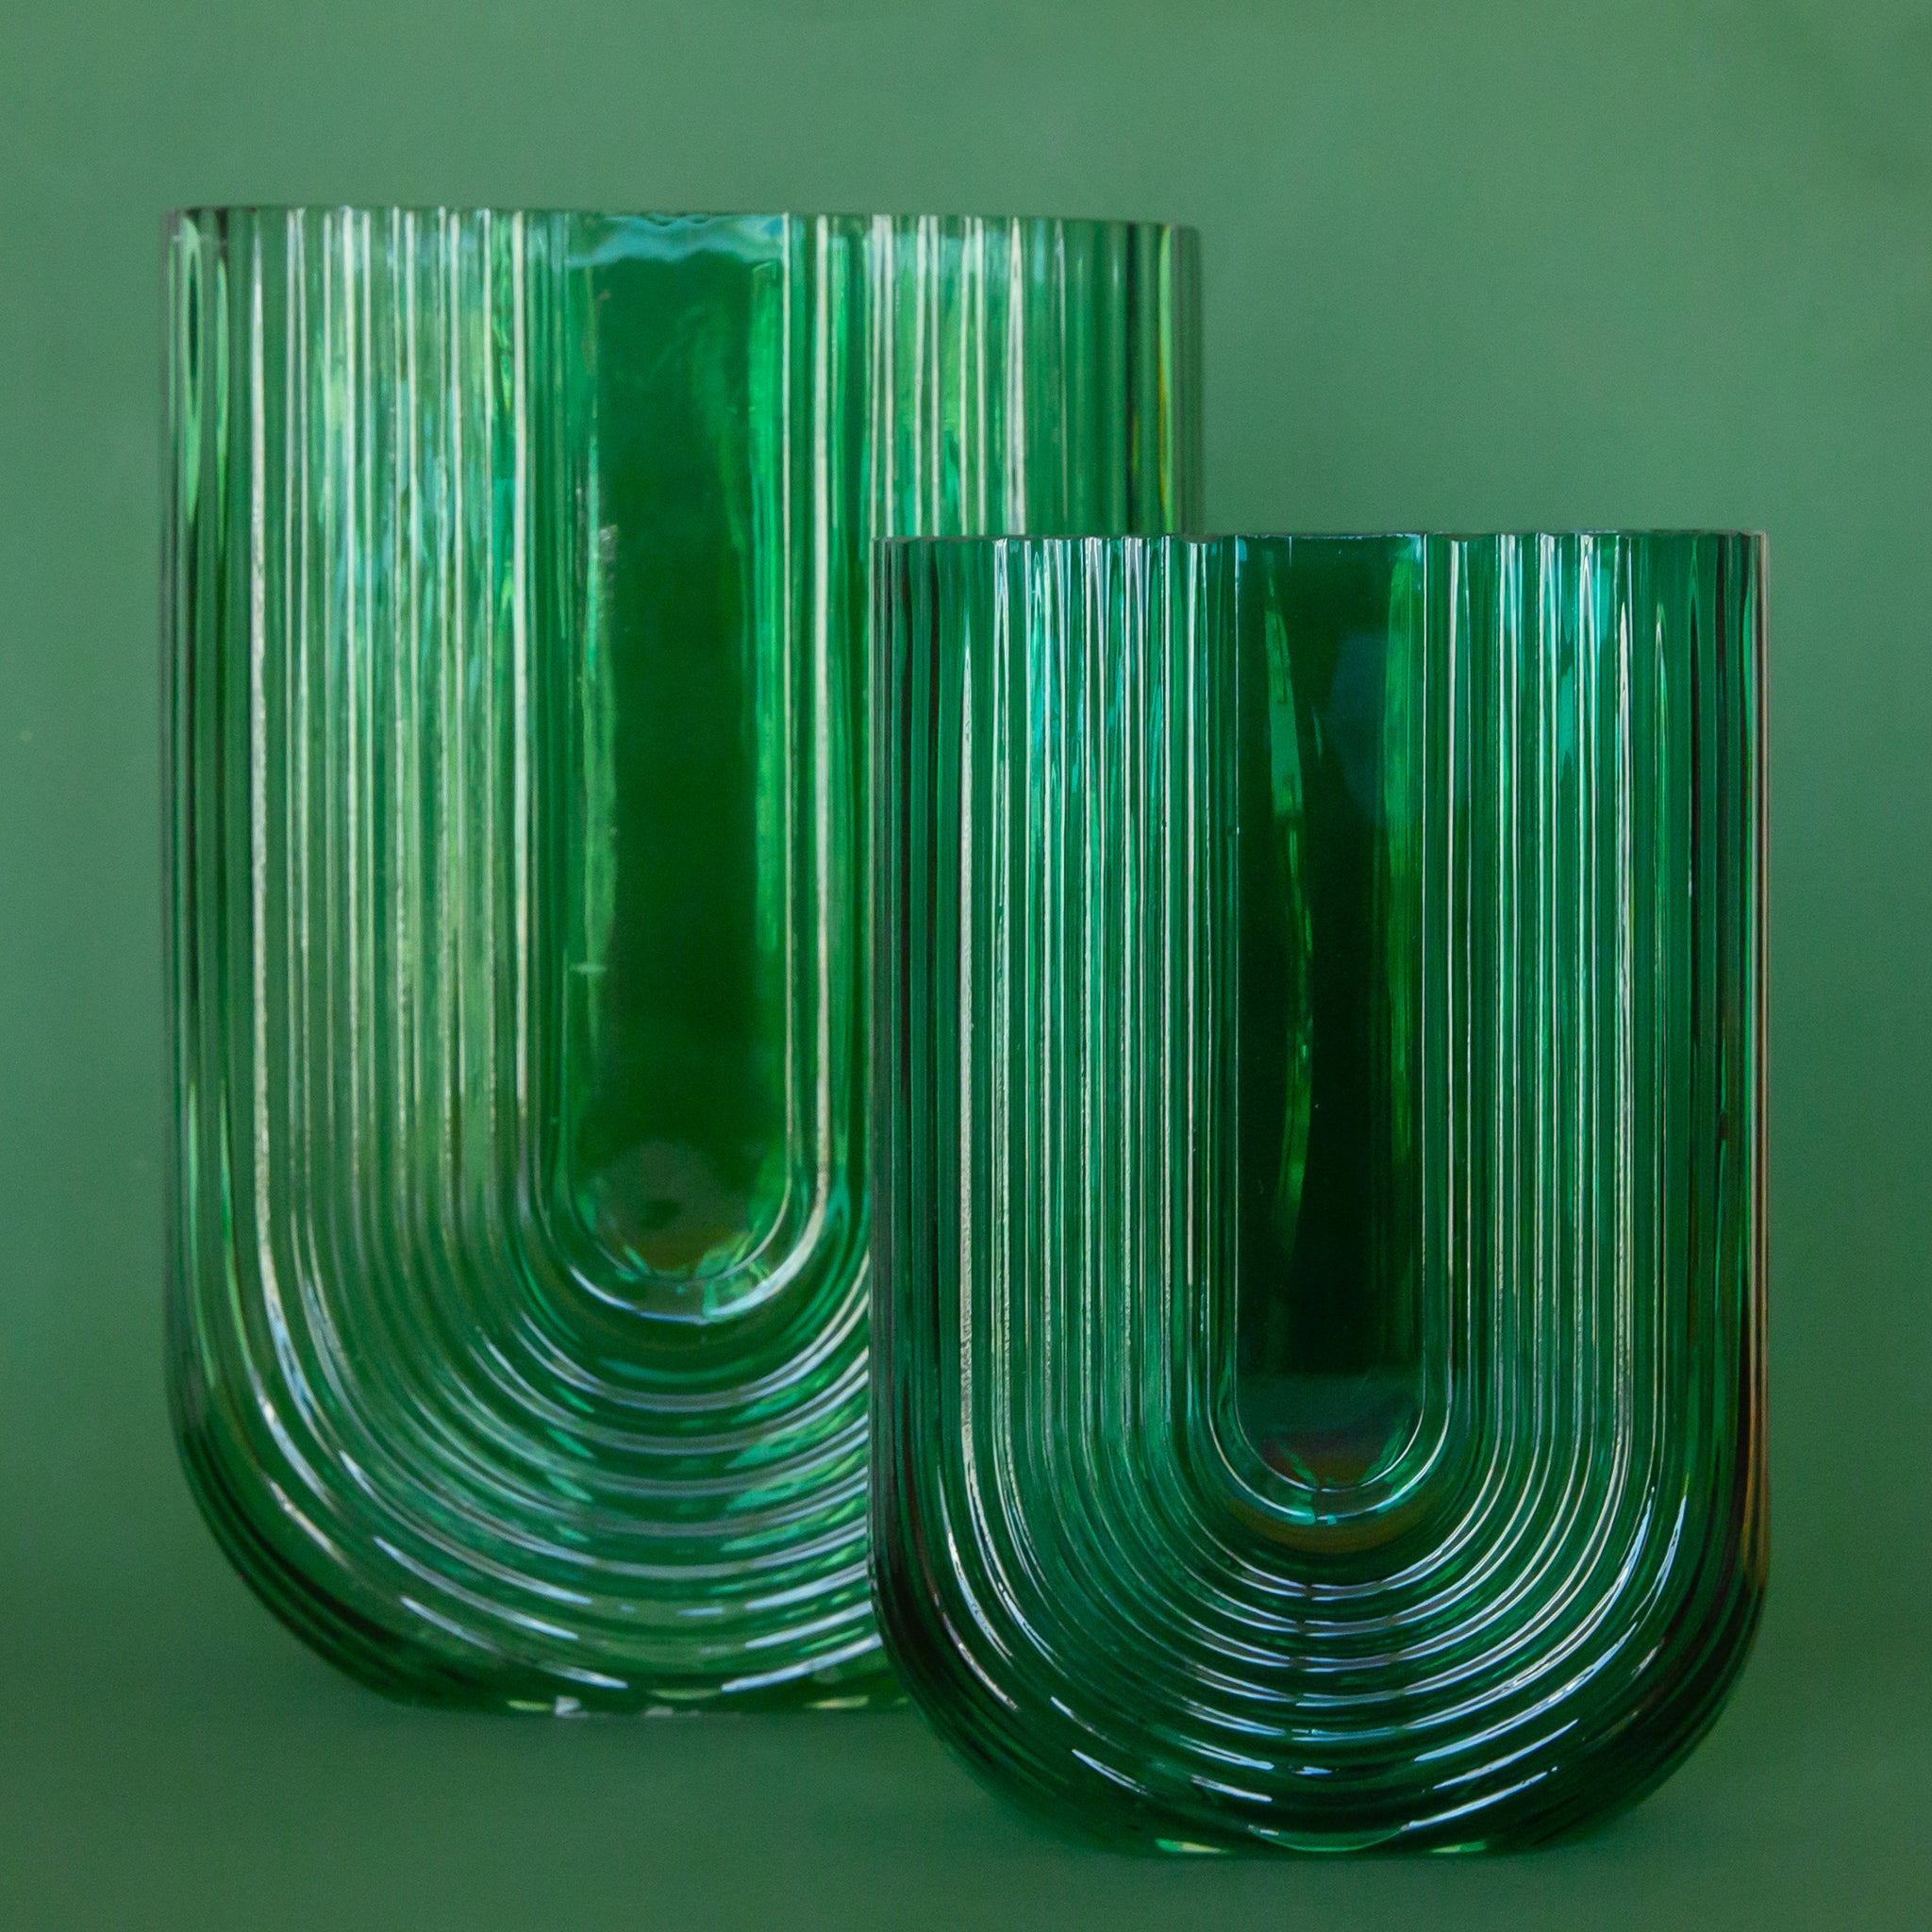 On a green background is two emerald green arched shaped glass vases. Each vase sold separately.